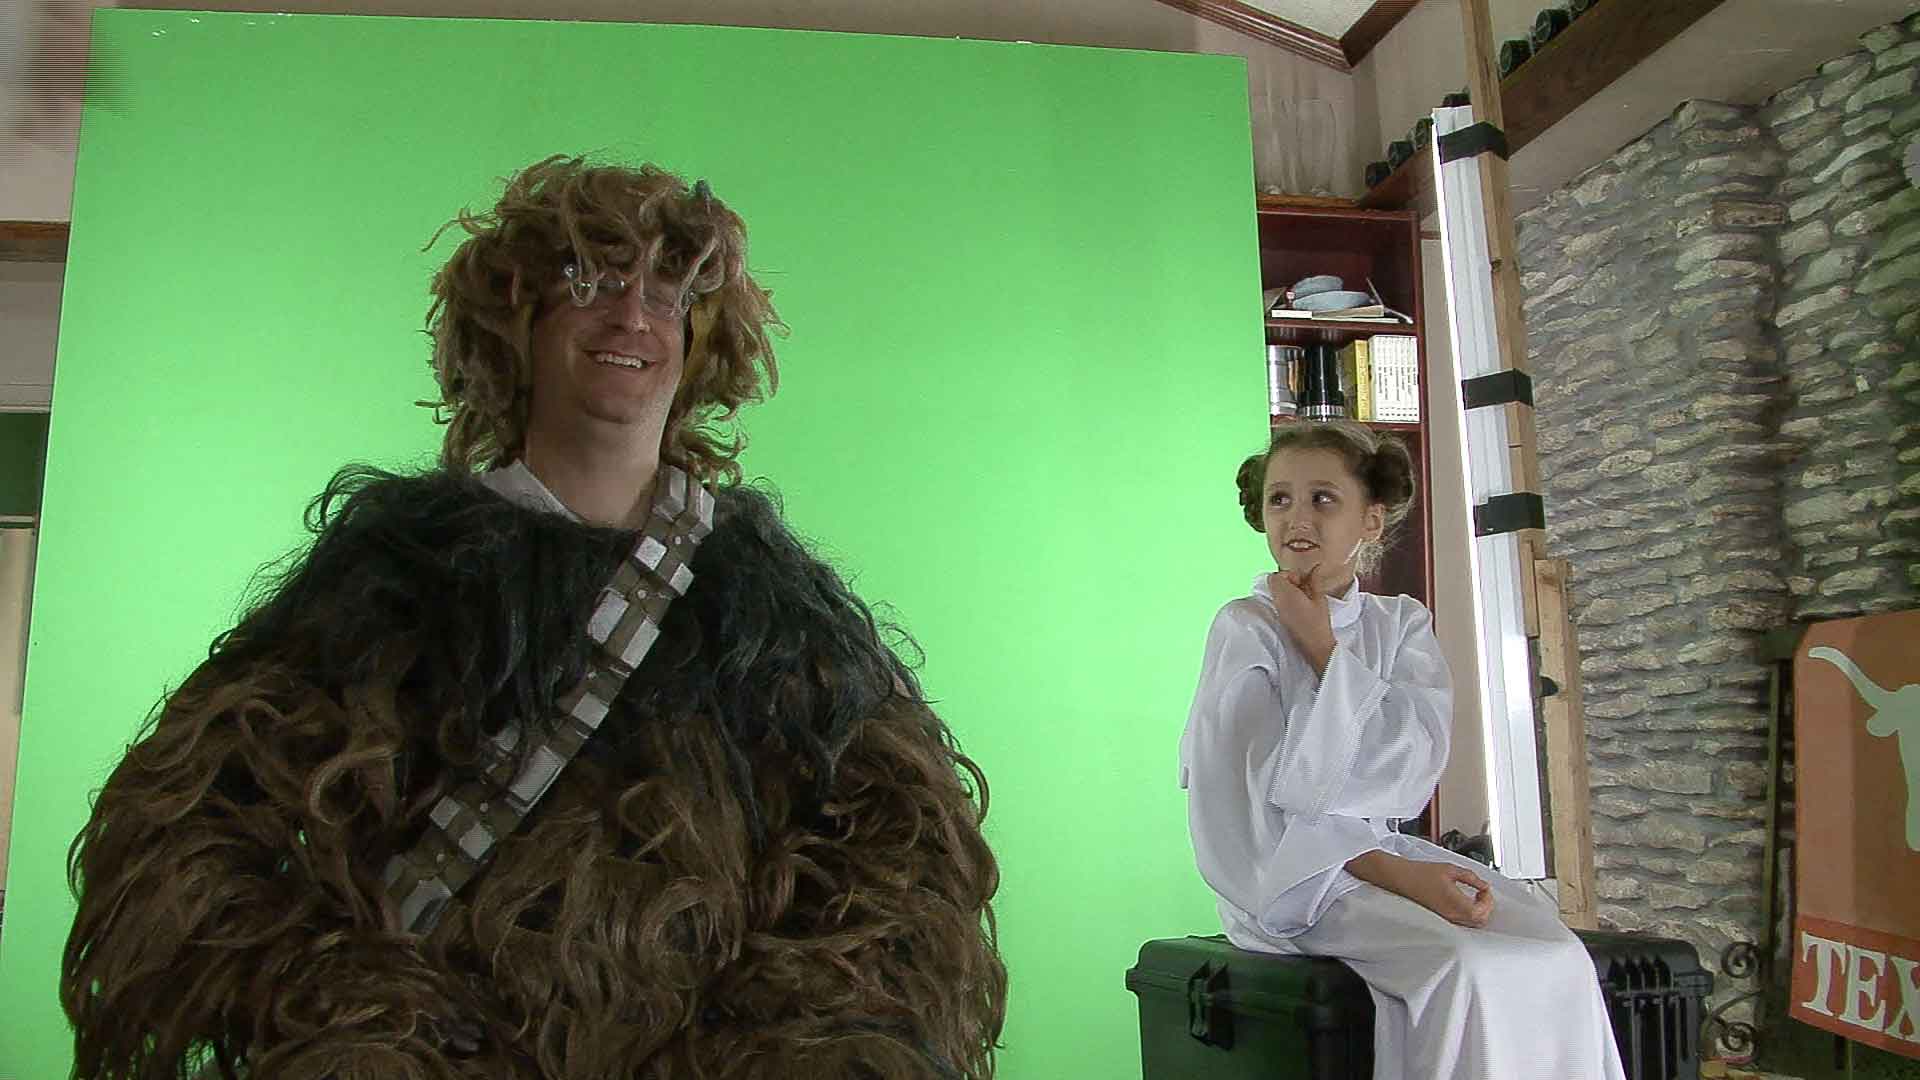 Christopher as Chewbacca in front of a green screen next to a kid being Princess Leia looking at him